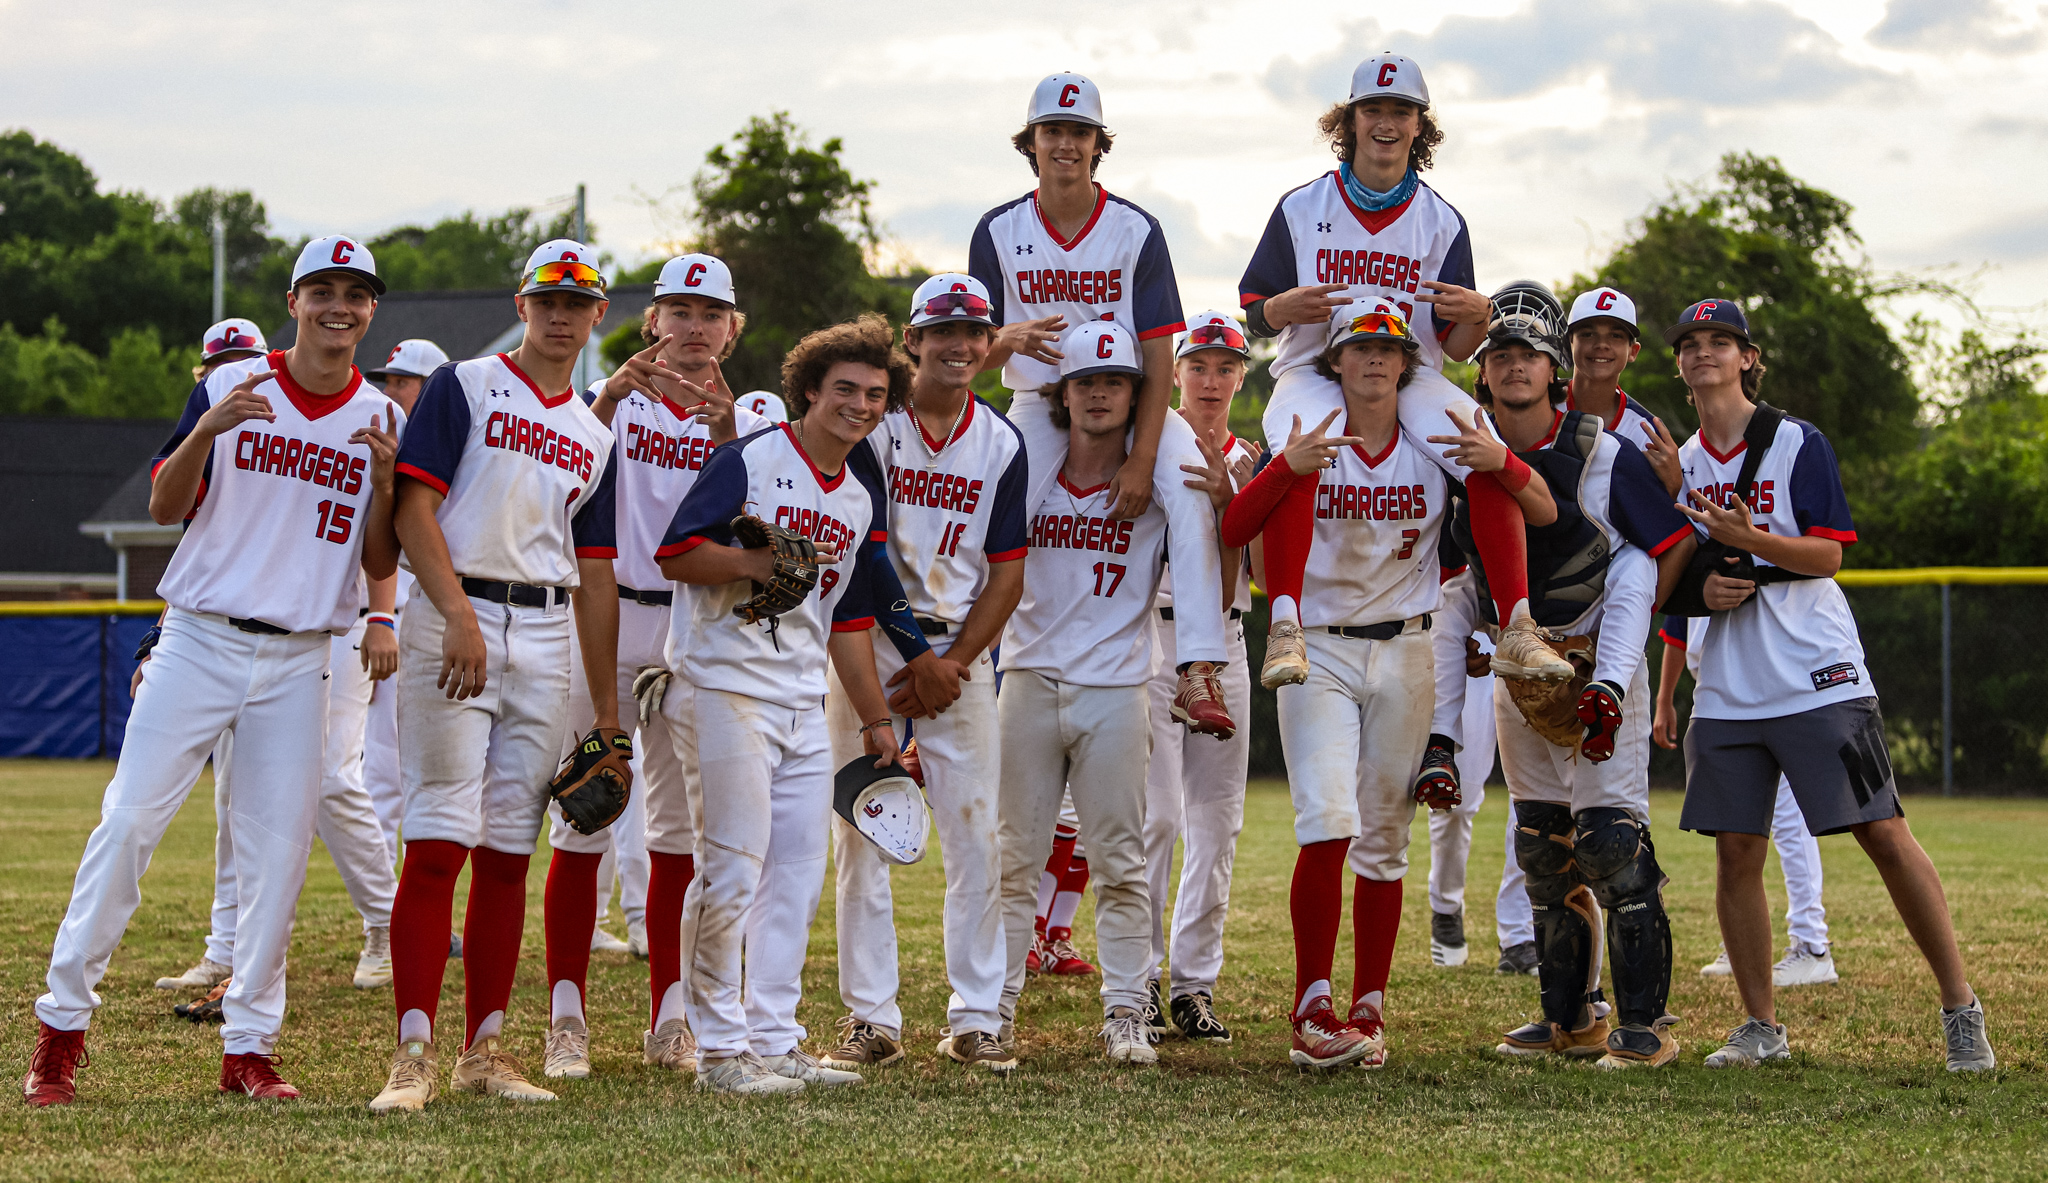 Baseball: WCDS Shuts Out Caldwell Academy To Reach State Championship Series (PHOTO GALLERY)